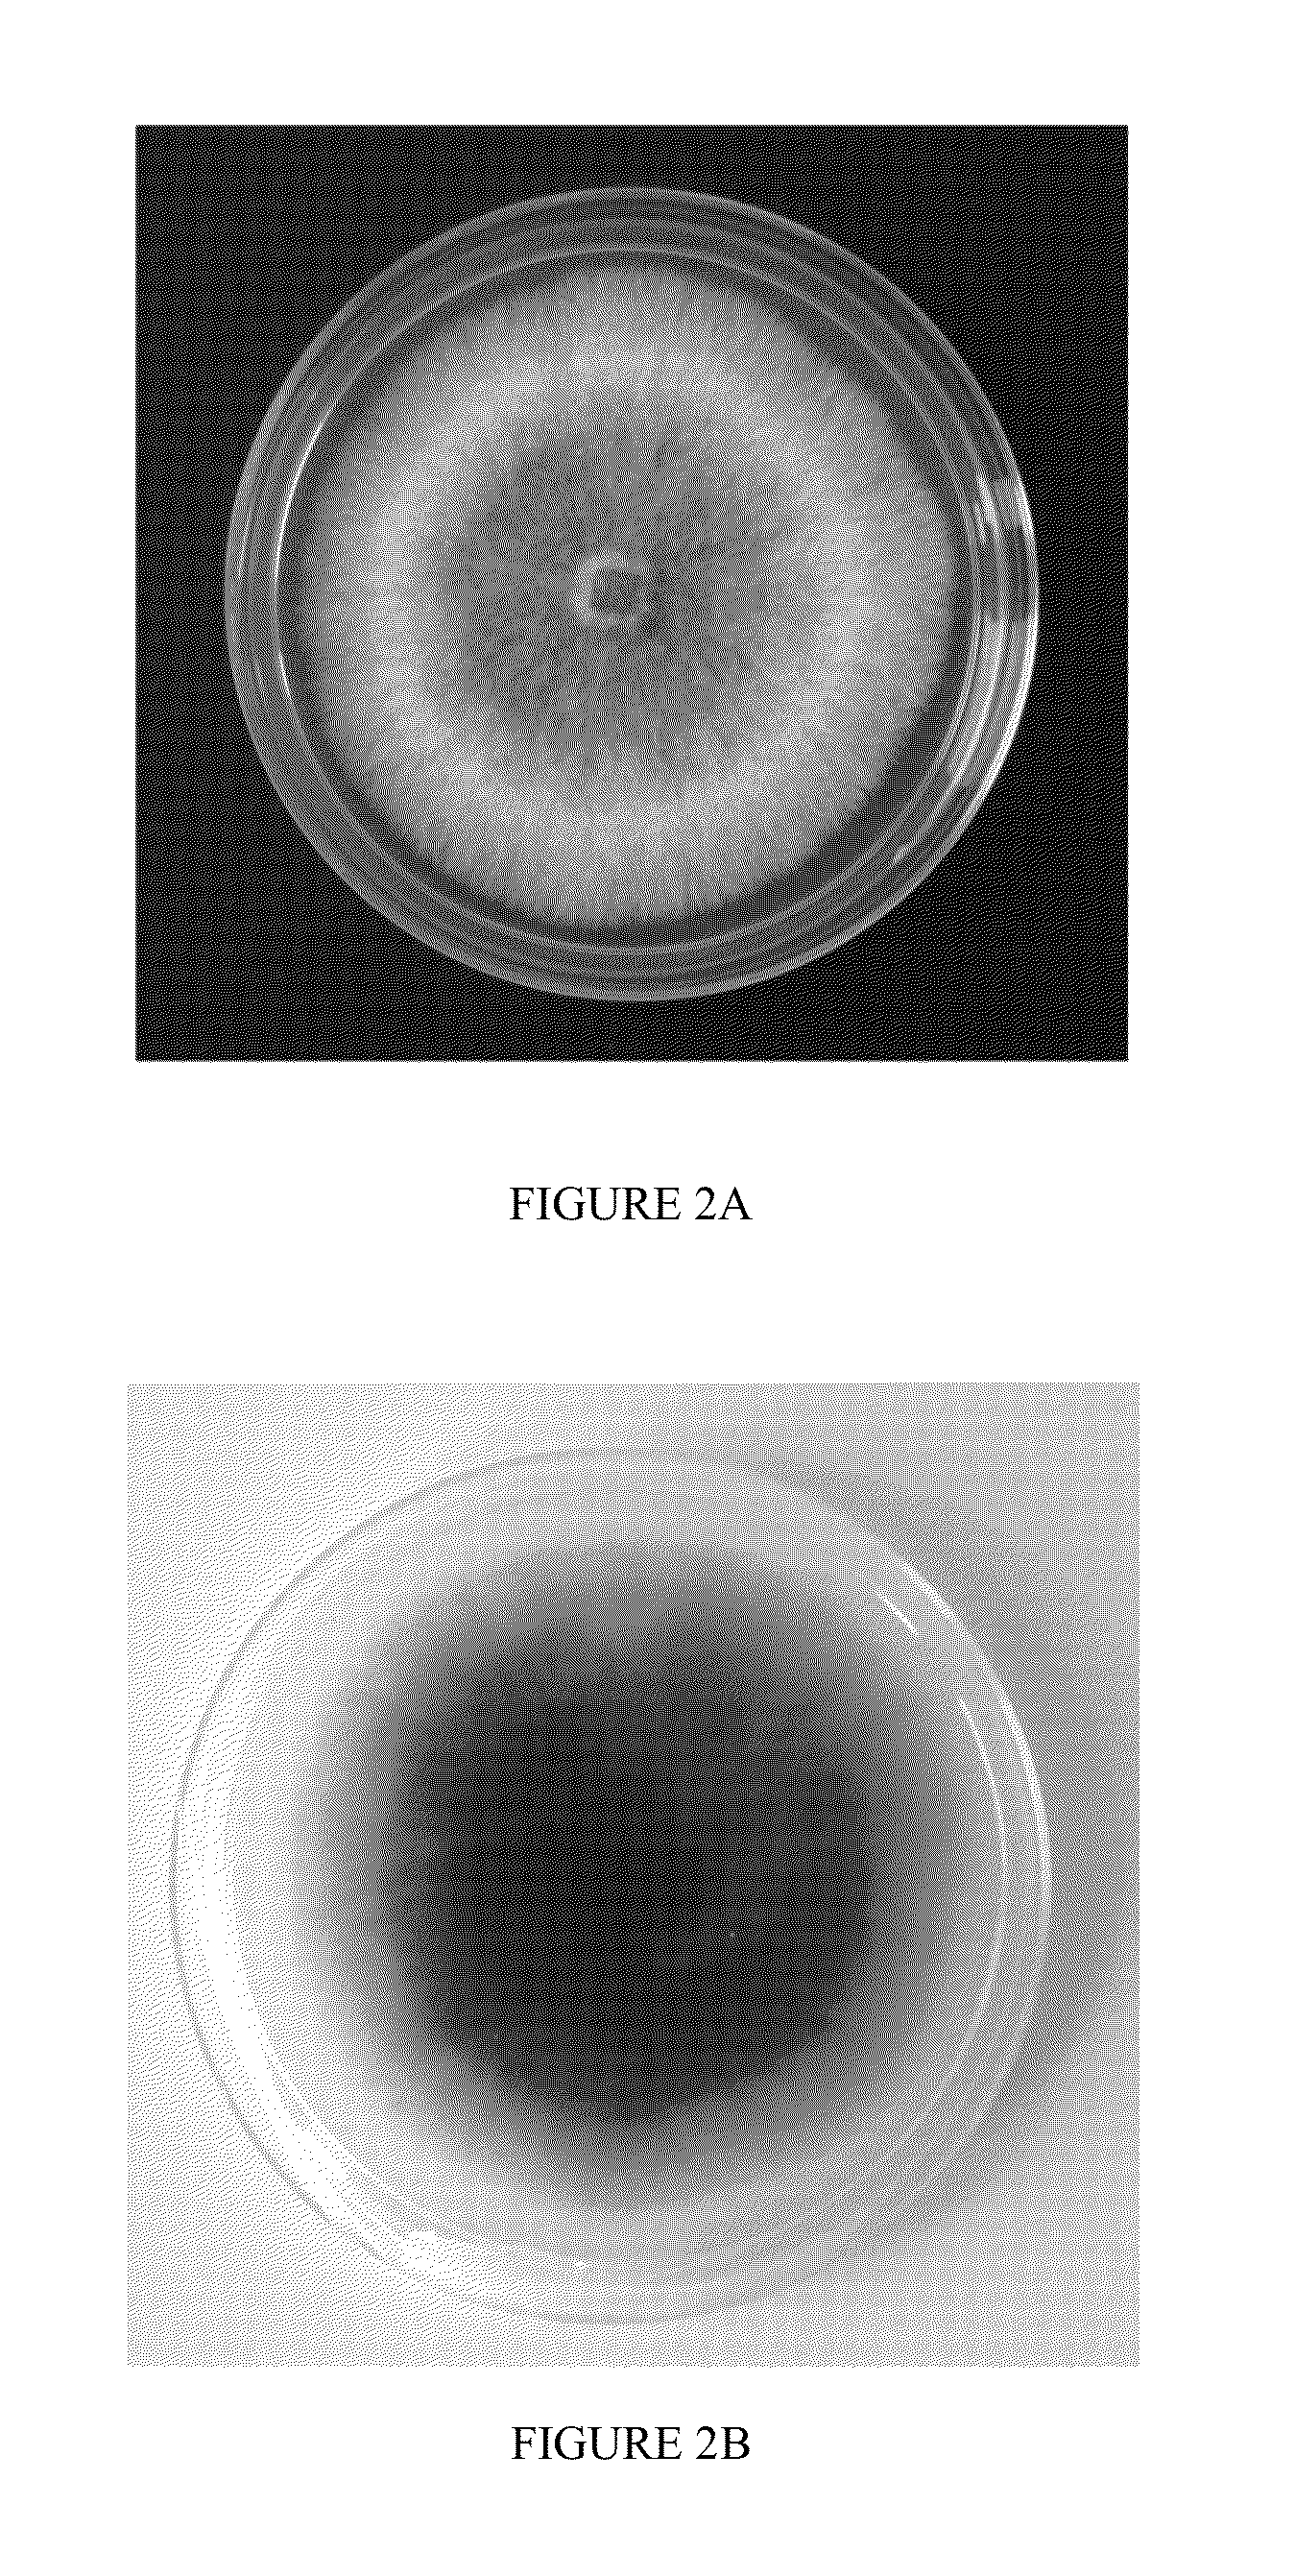 Method of Producing Volatile Organic Compounds from Microorganisms